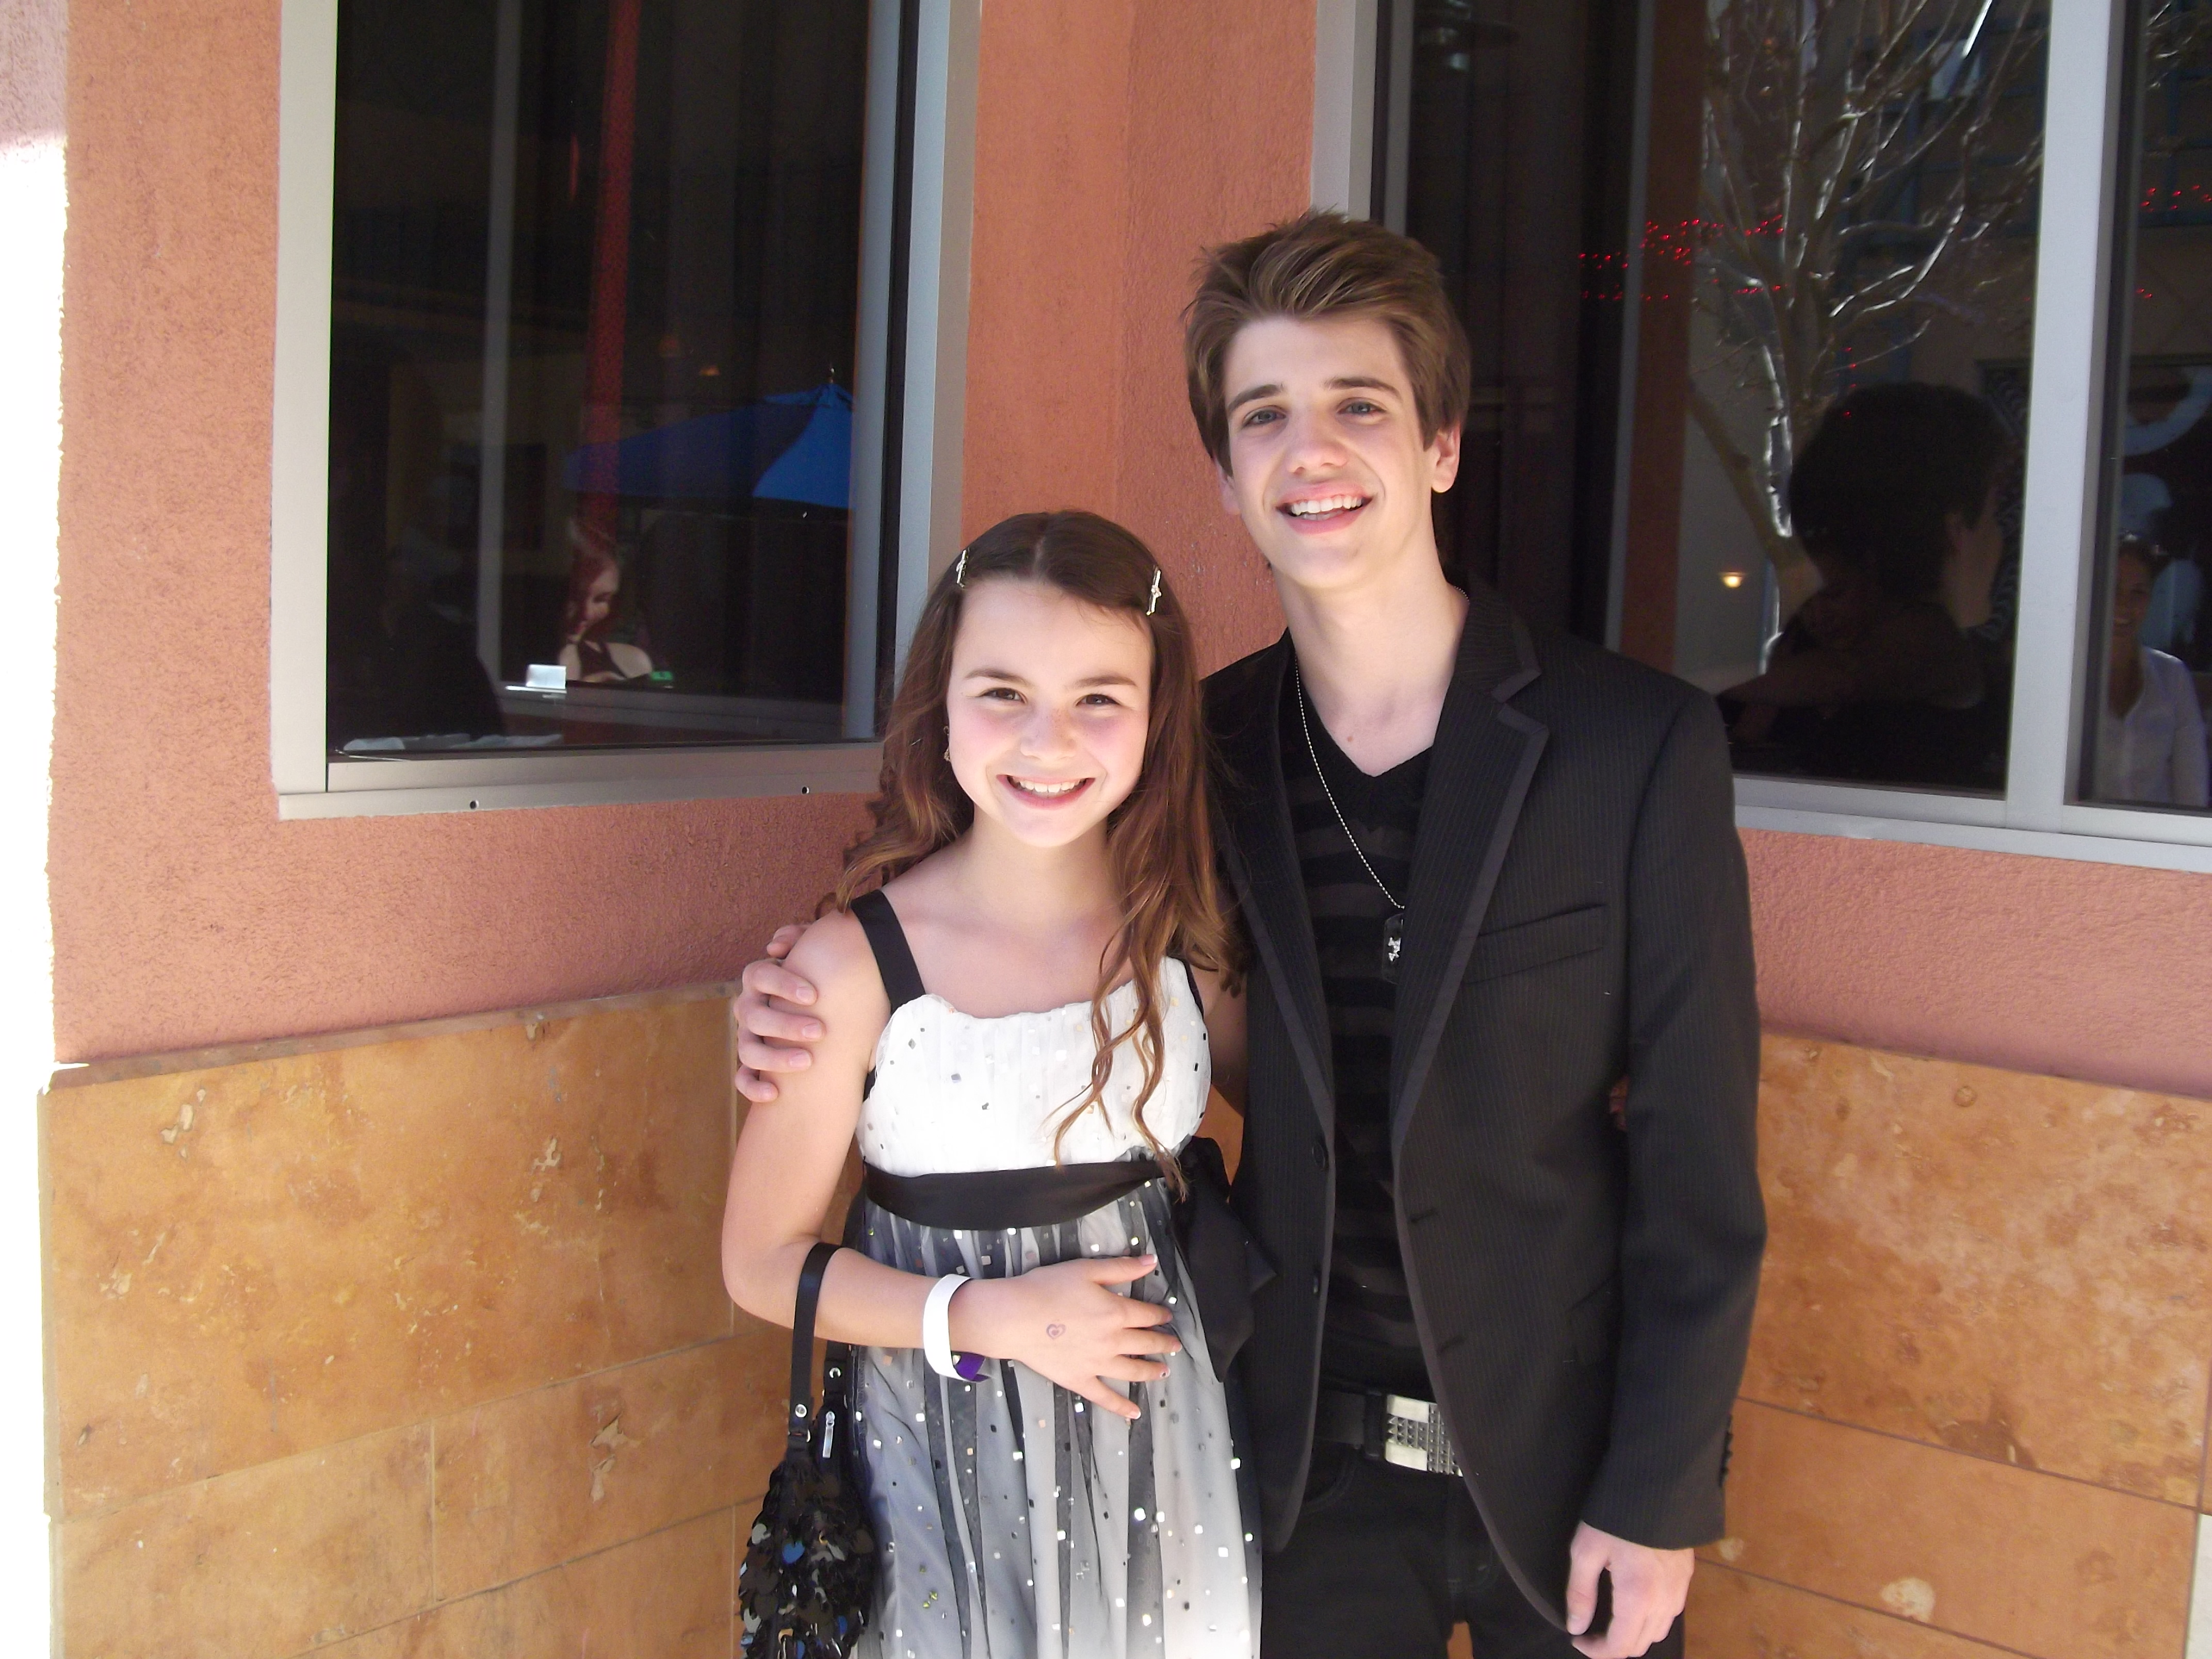 Jacquelyn and Brandon Russell at his movie premiere for 